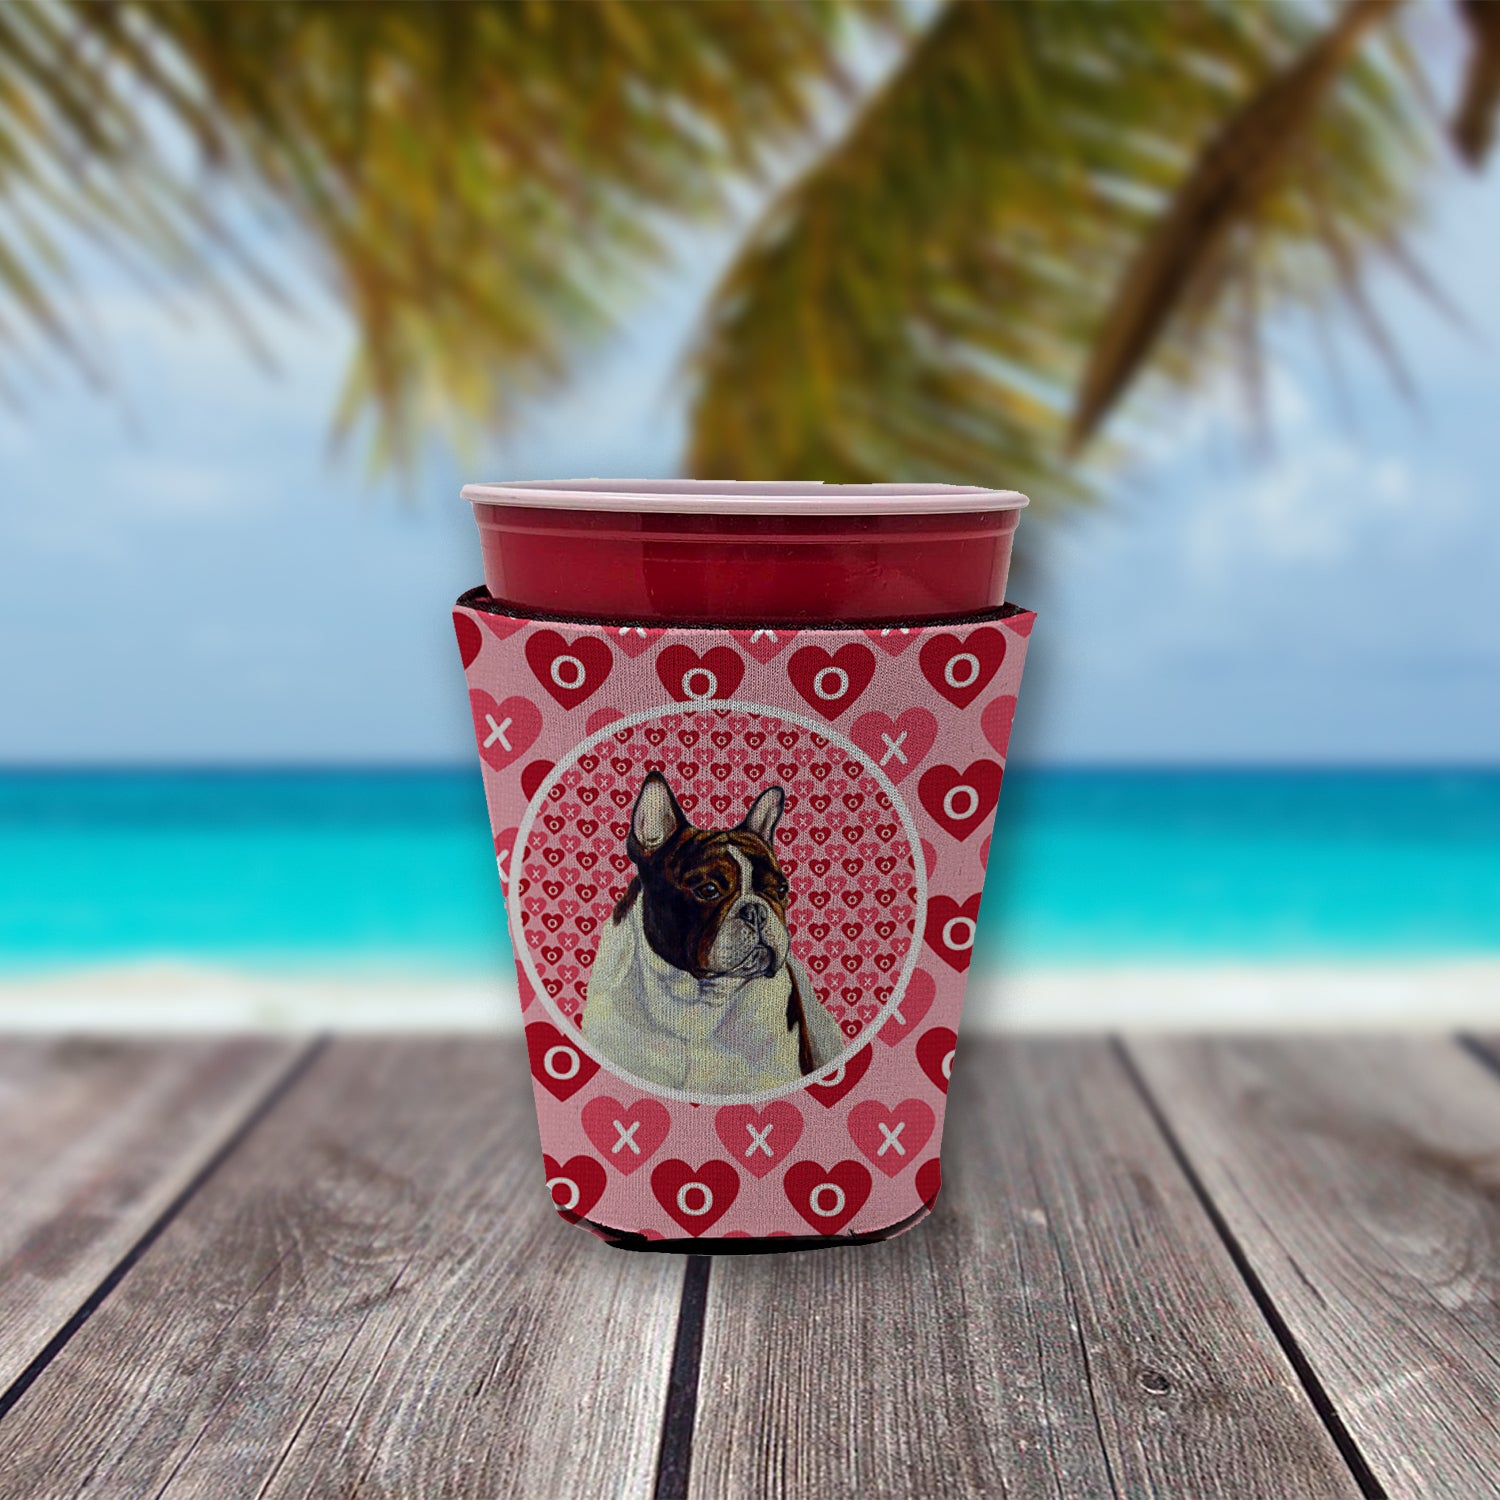 Bouledogue Français Valentine's Love and Hearts Red Solo Cup Beverage Insulator Hugger